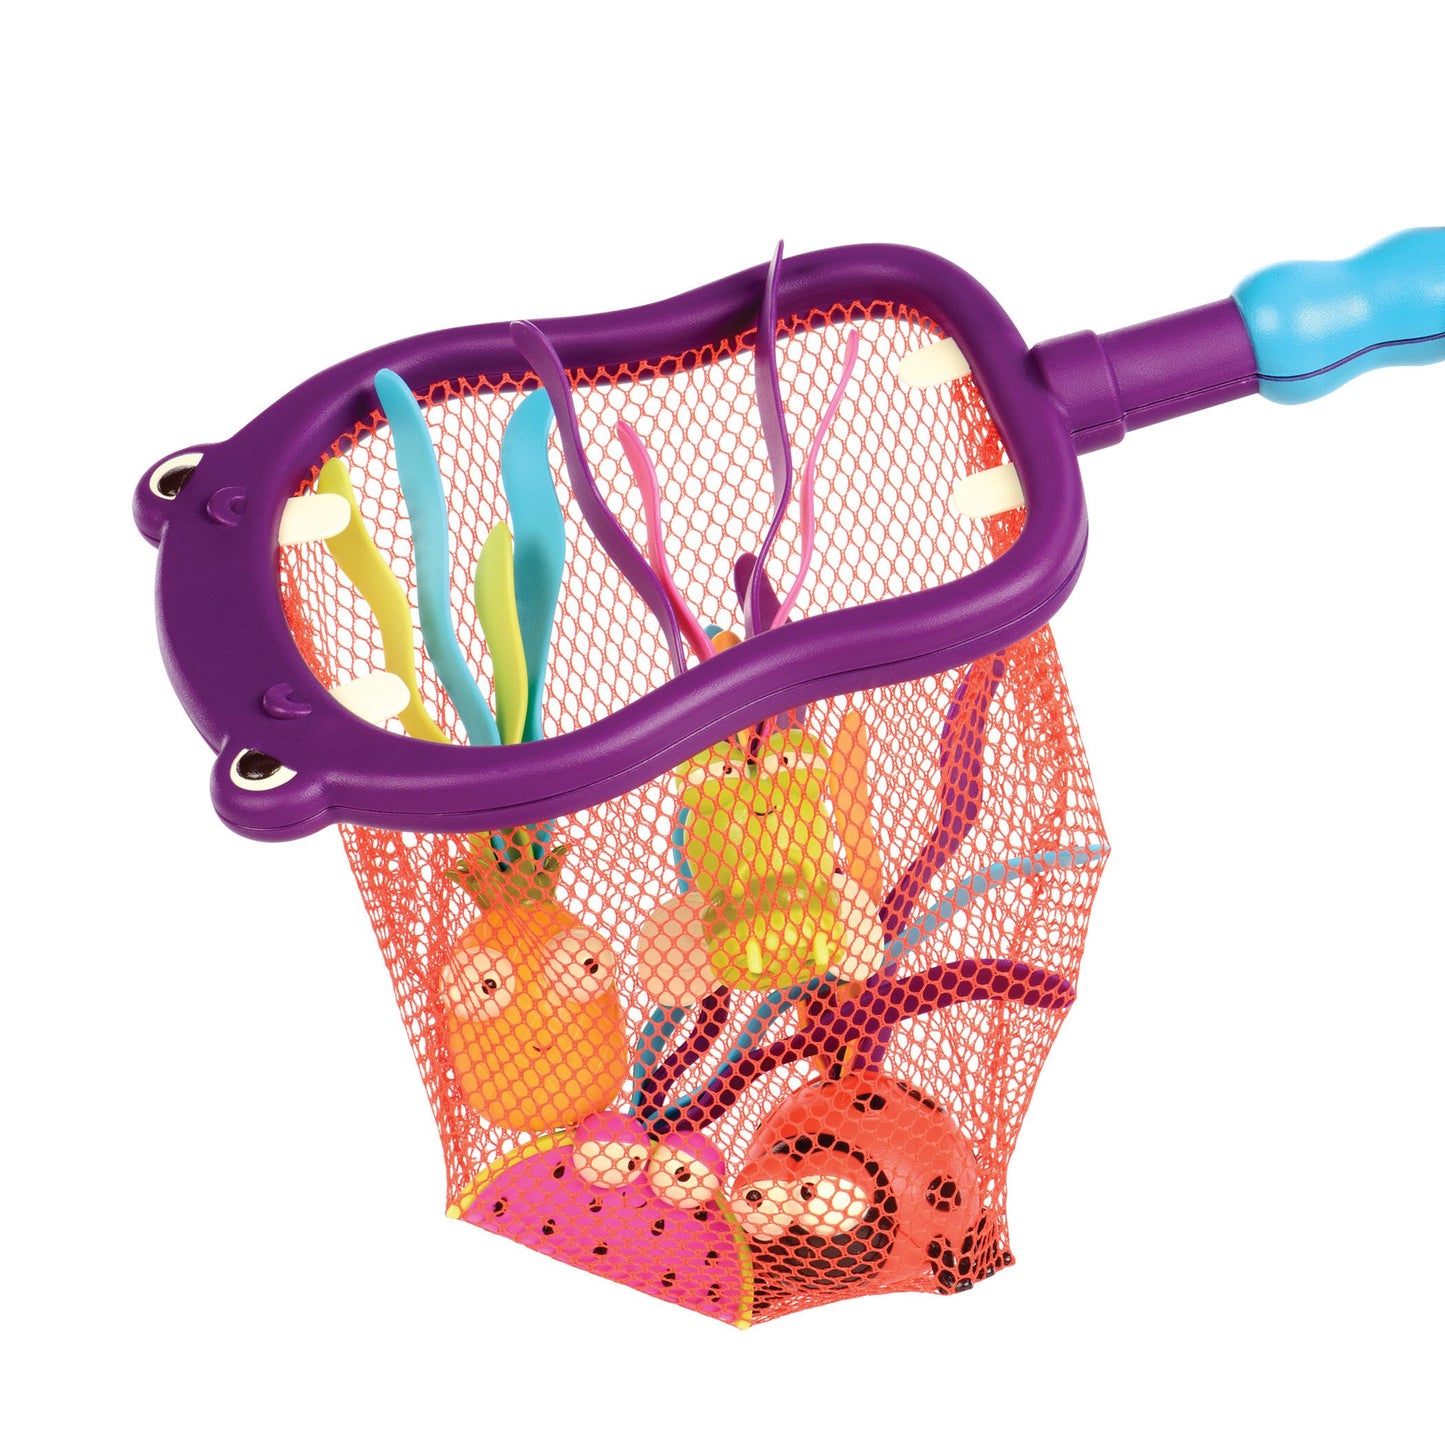 B. toys by Battat B. toys - Hippo Scoop-A-Diving Pool Toys - 1 Hippo Net &amp; 4 Water Toys for Kids 3+ (5Piece), violet Hippo Diving Set